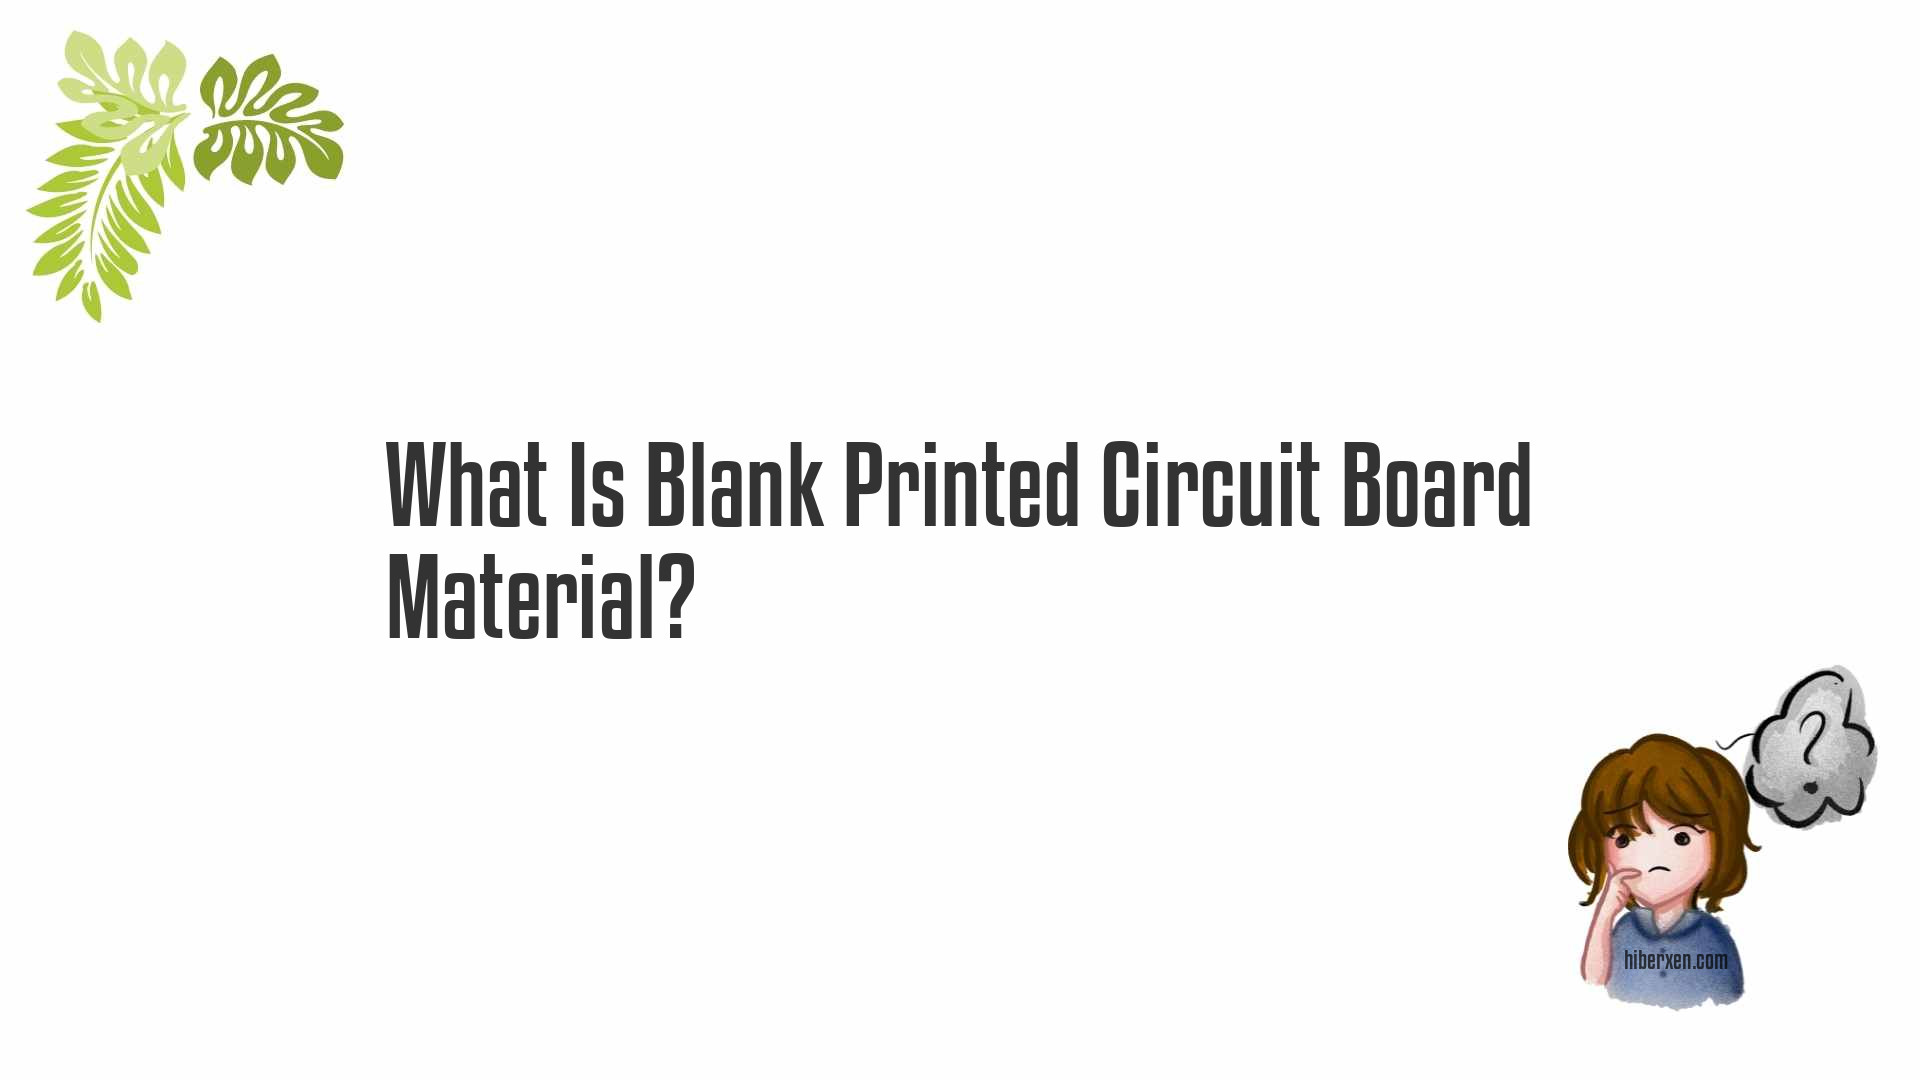 What Is Blank Printed Circuit Board Material?